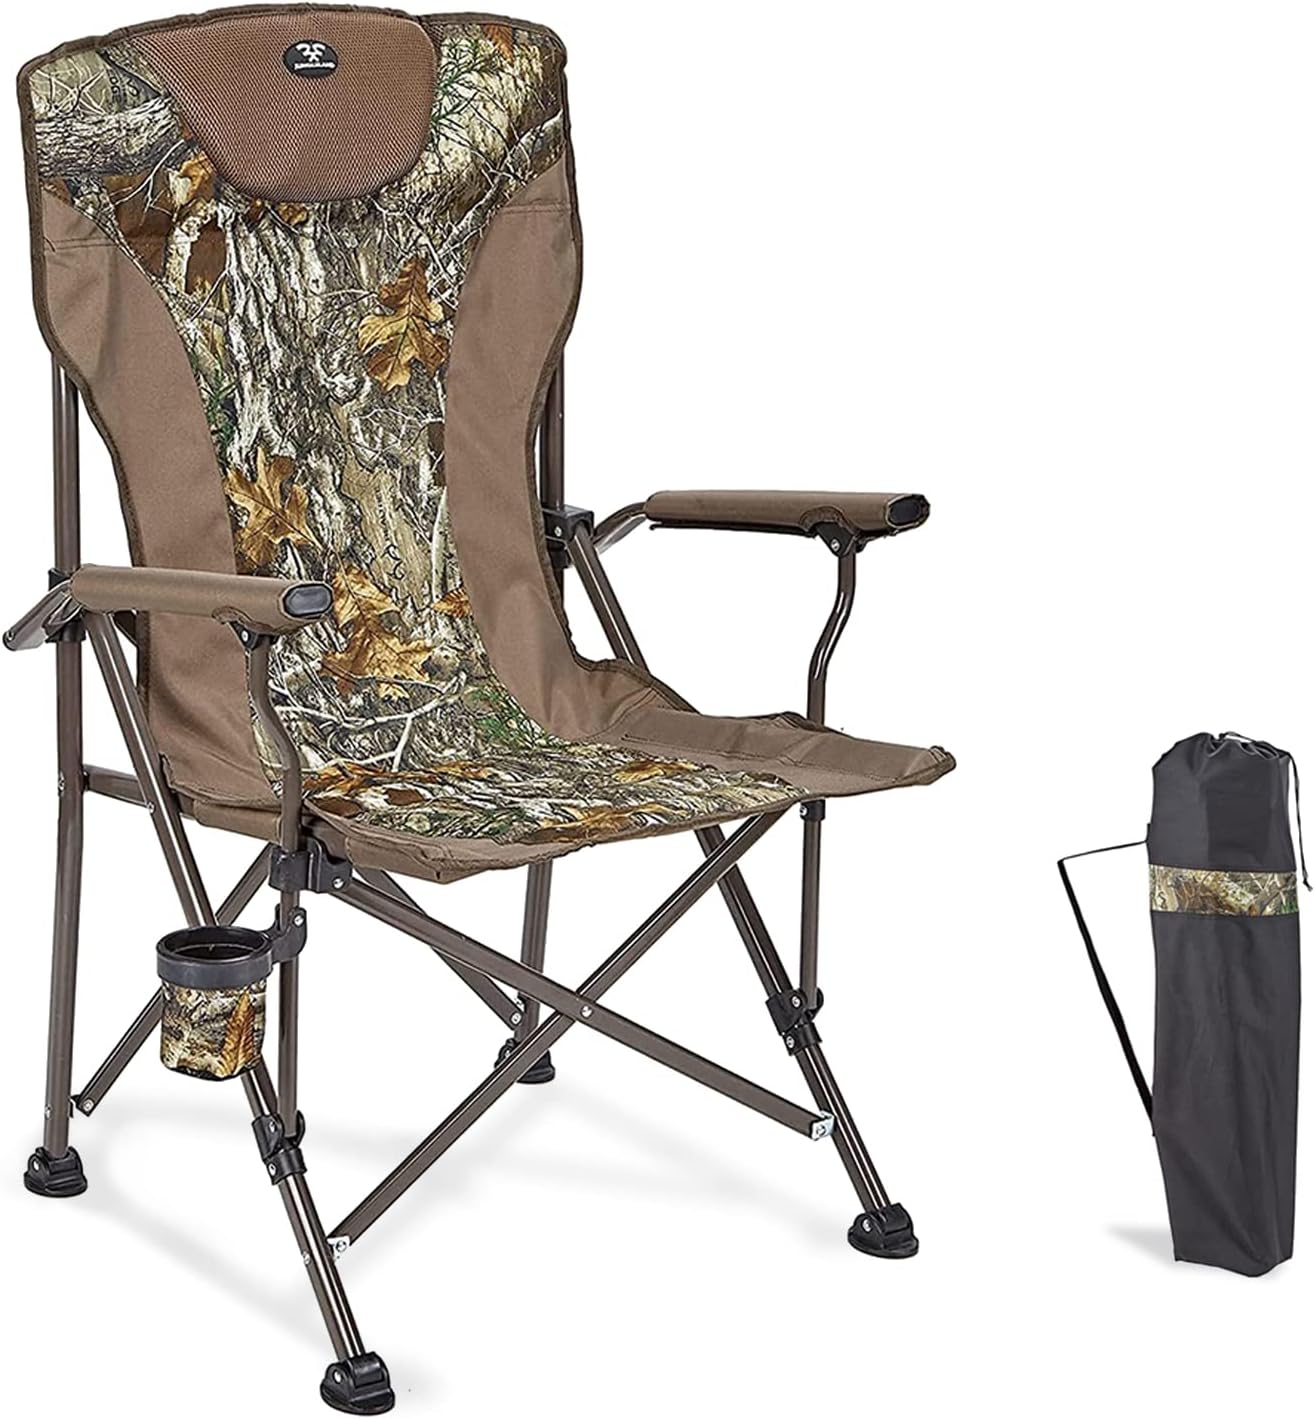 Portable Camouflage Camping Travel Chair With Padded and Cup Holder